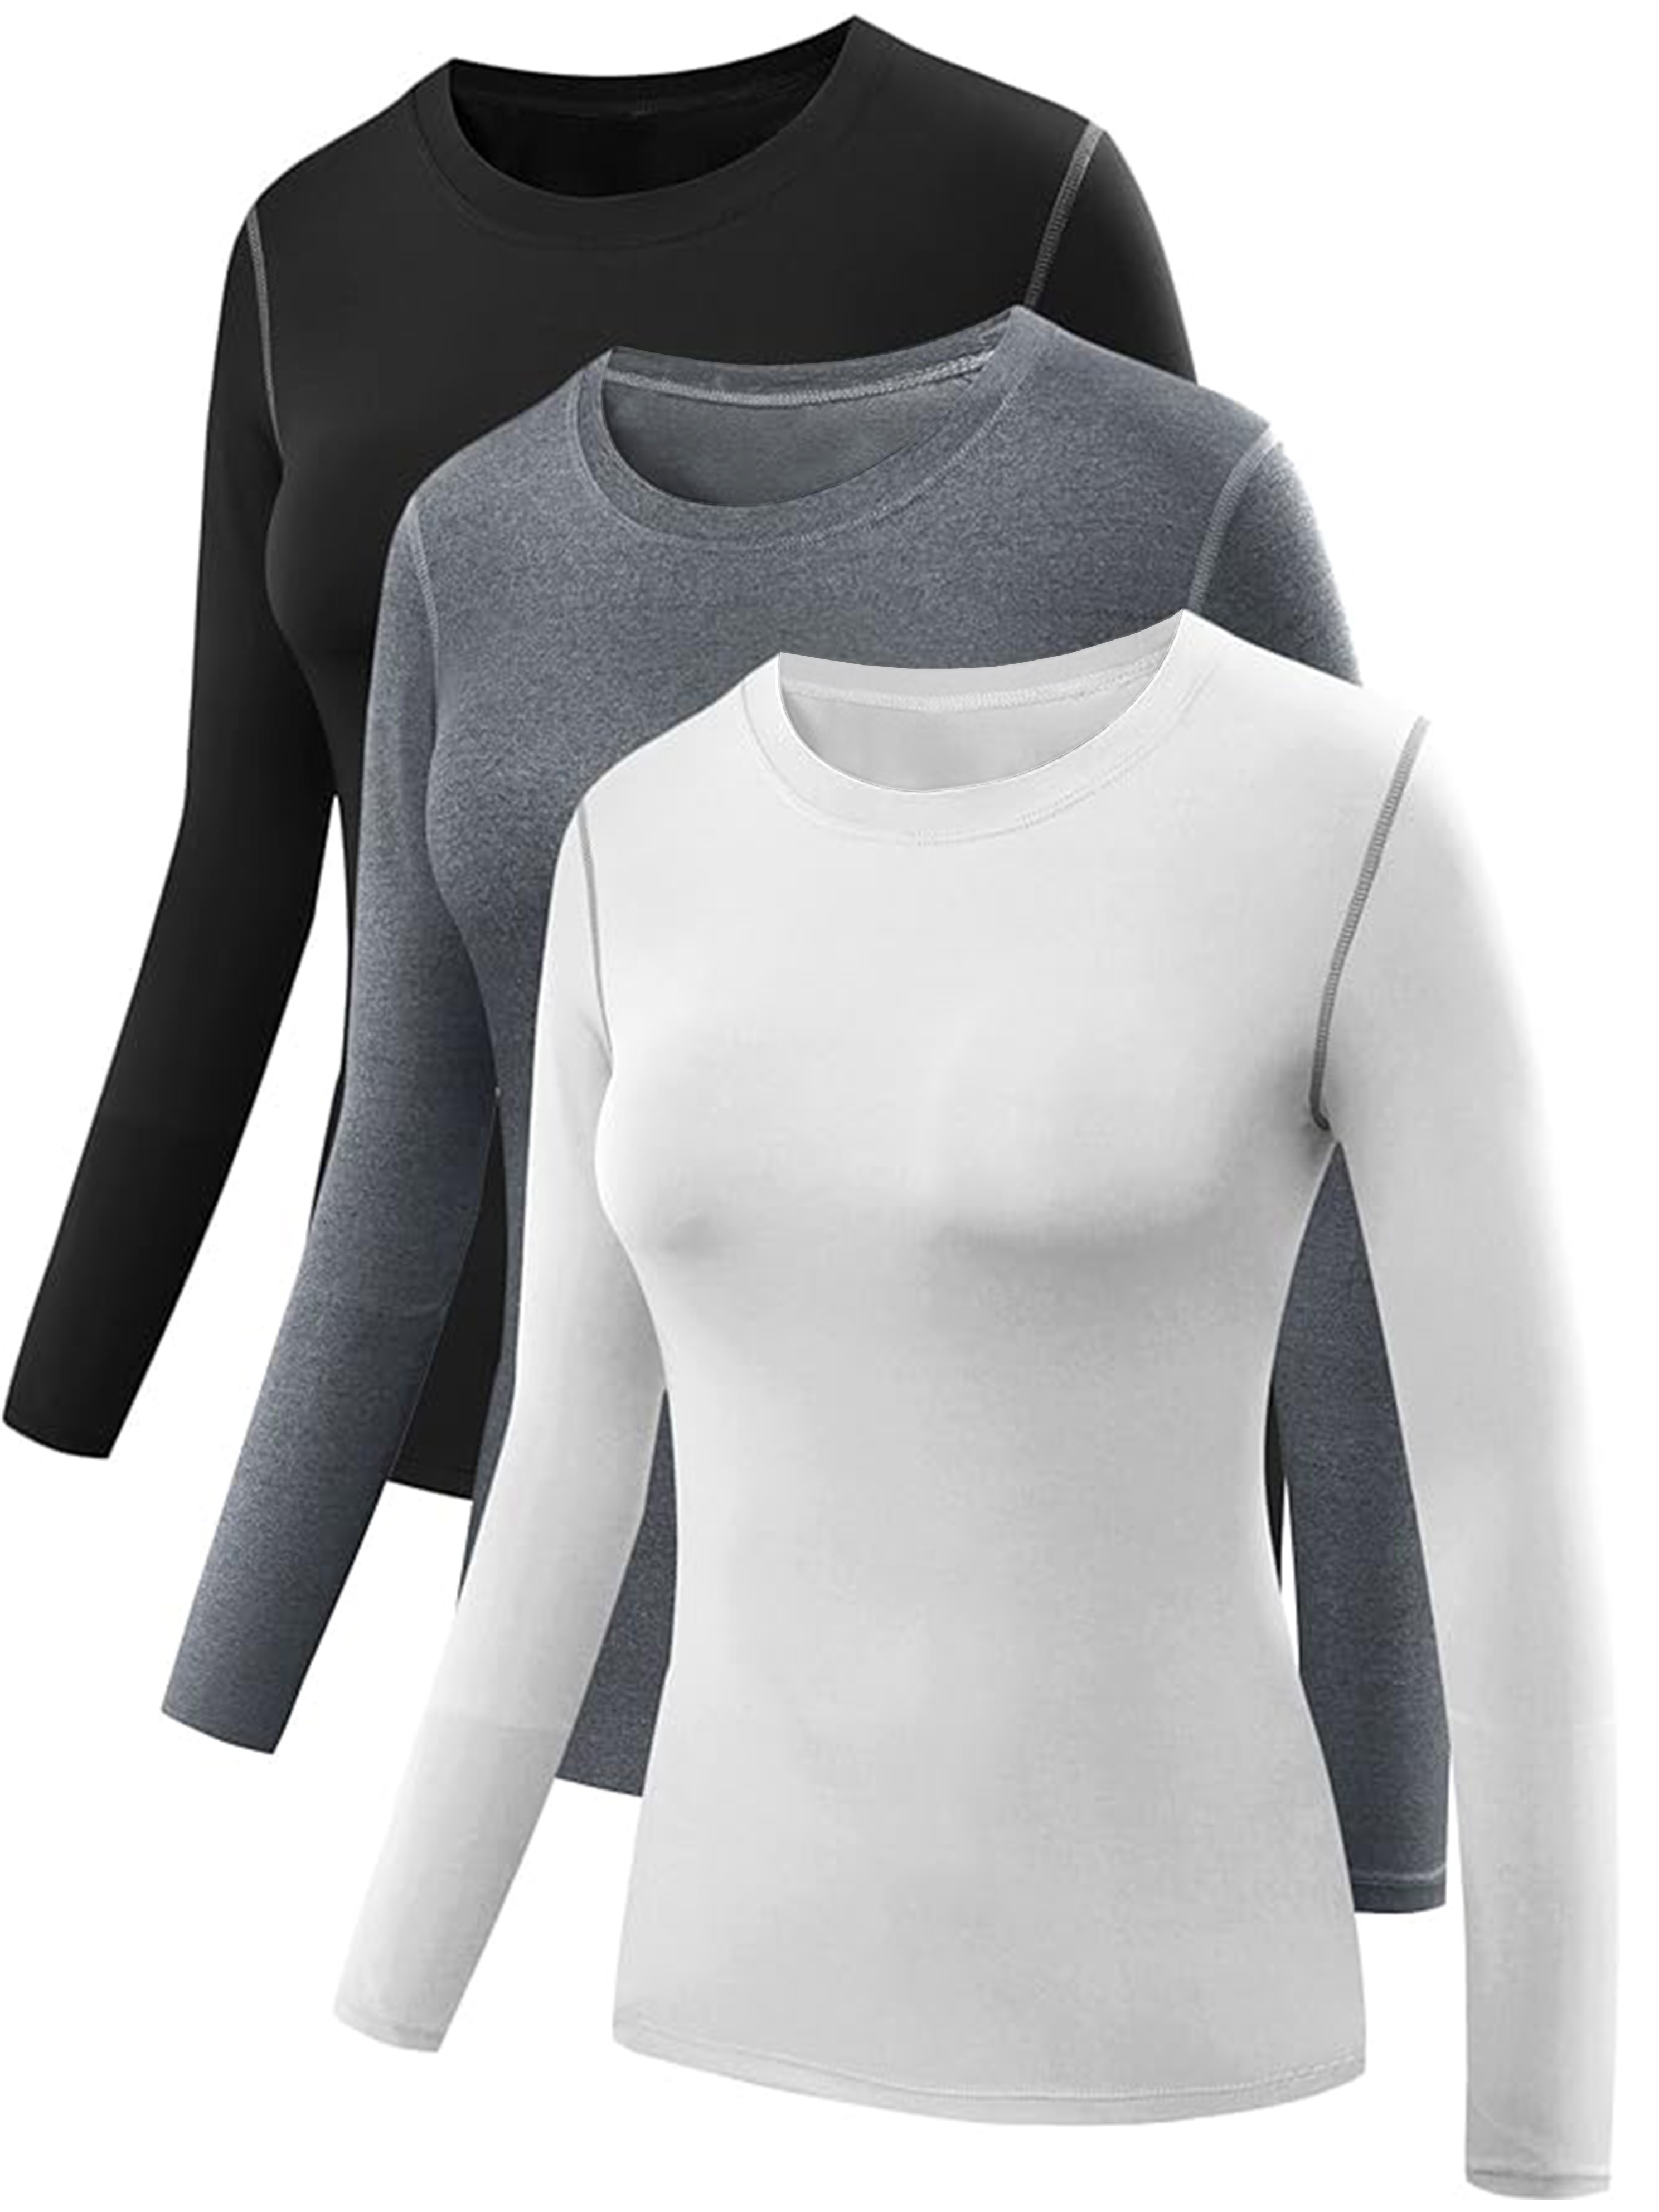 Yoga Long Sleeve Sports Tops Round Neck Running Fitness T-Shirt